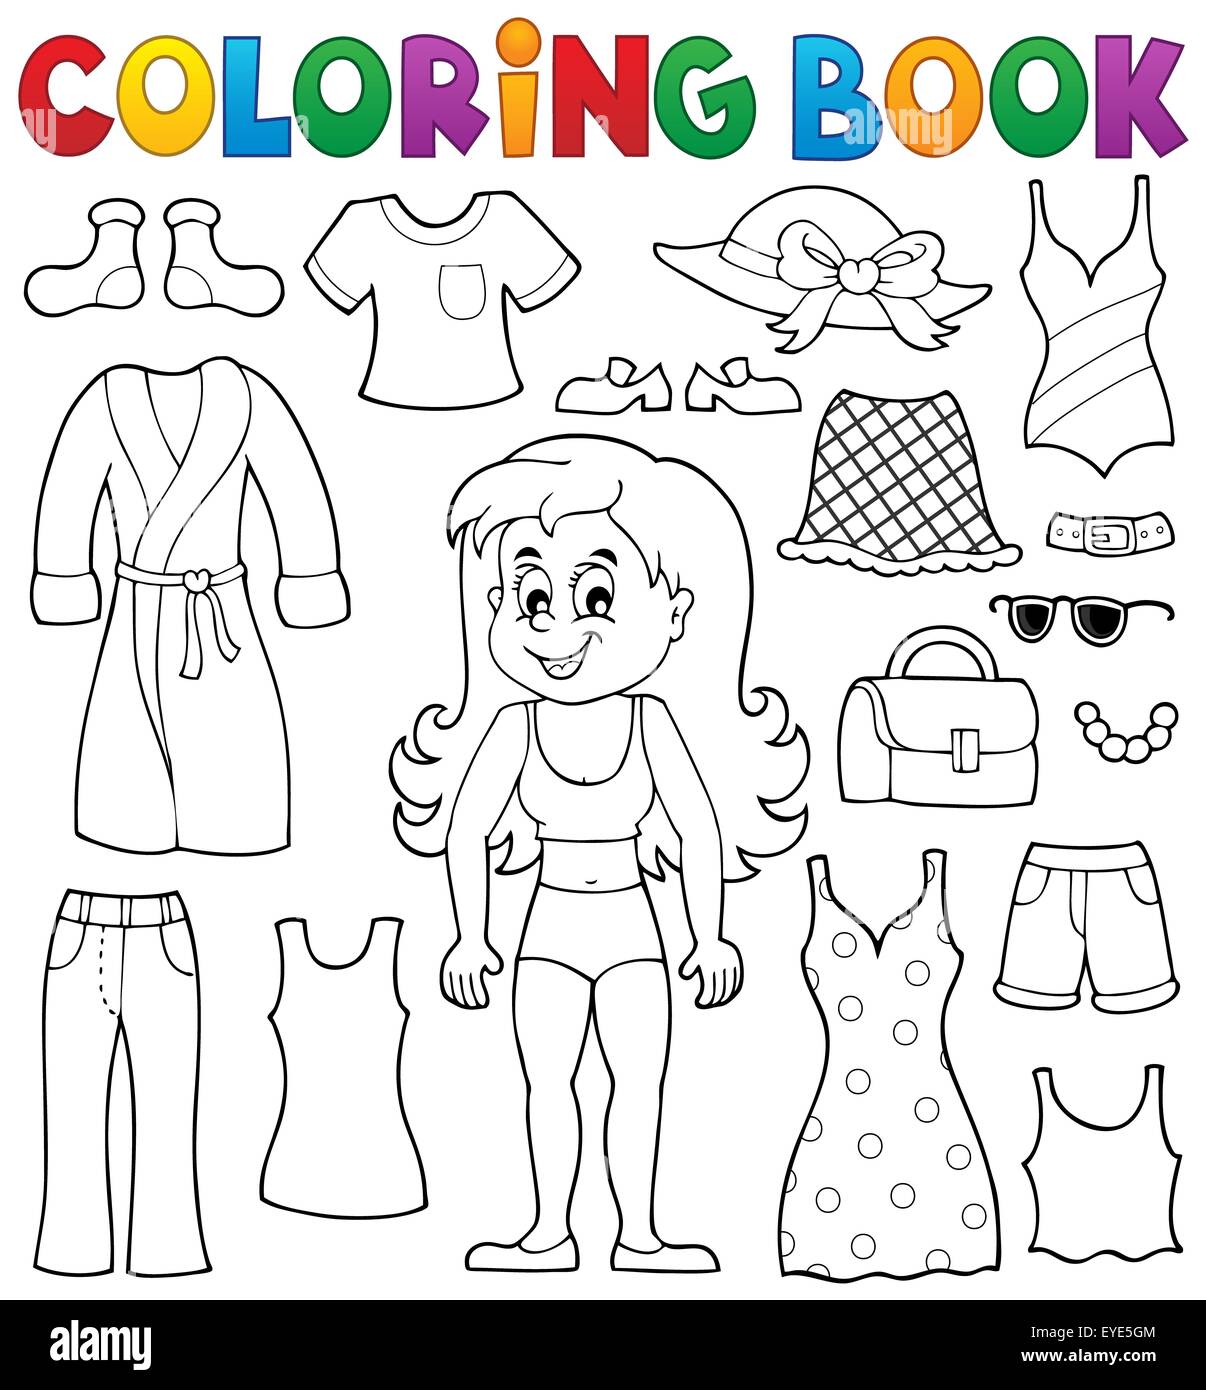 Coloring book girl with clothes theme 1 - picture illustration Stock Photo  - Alamy